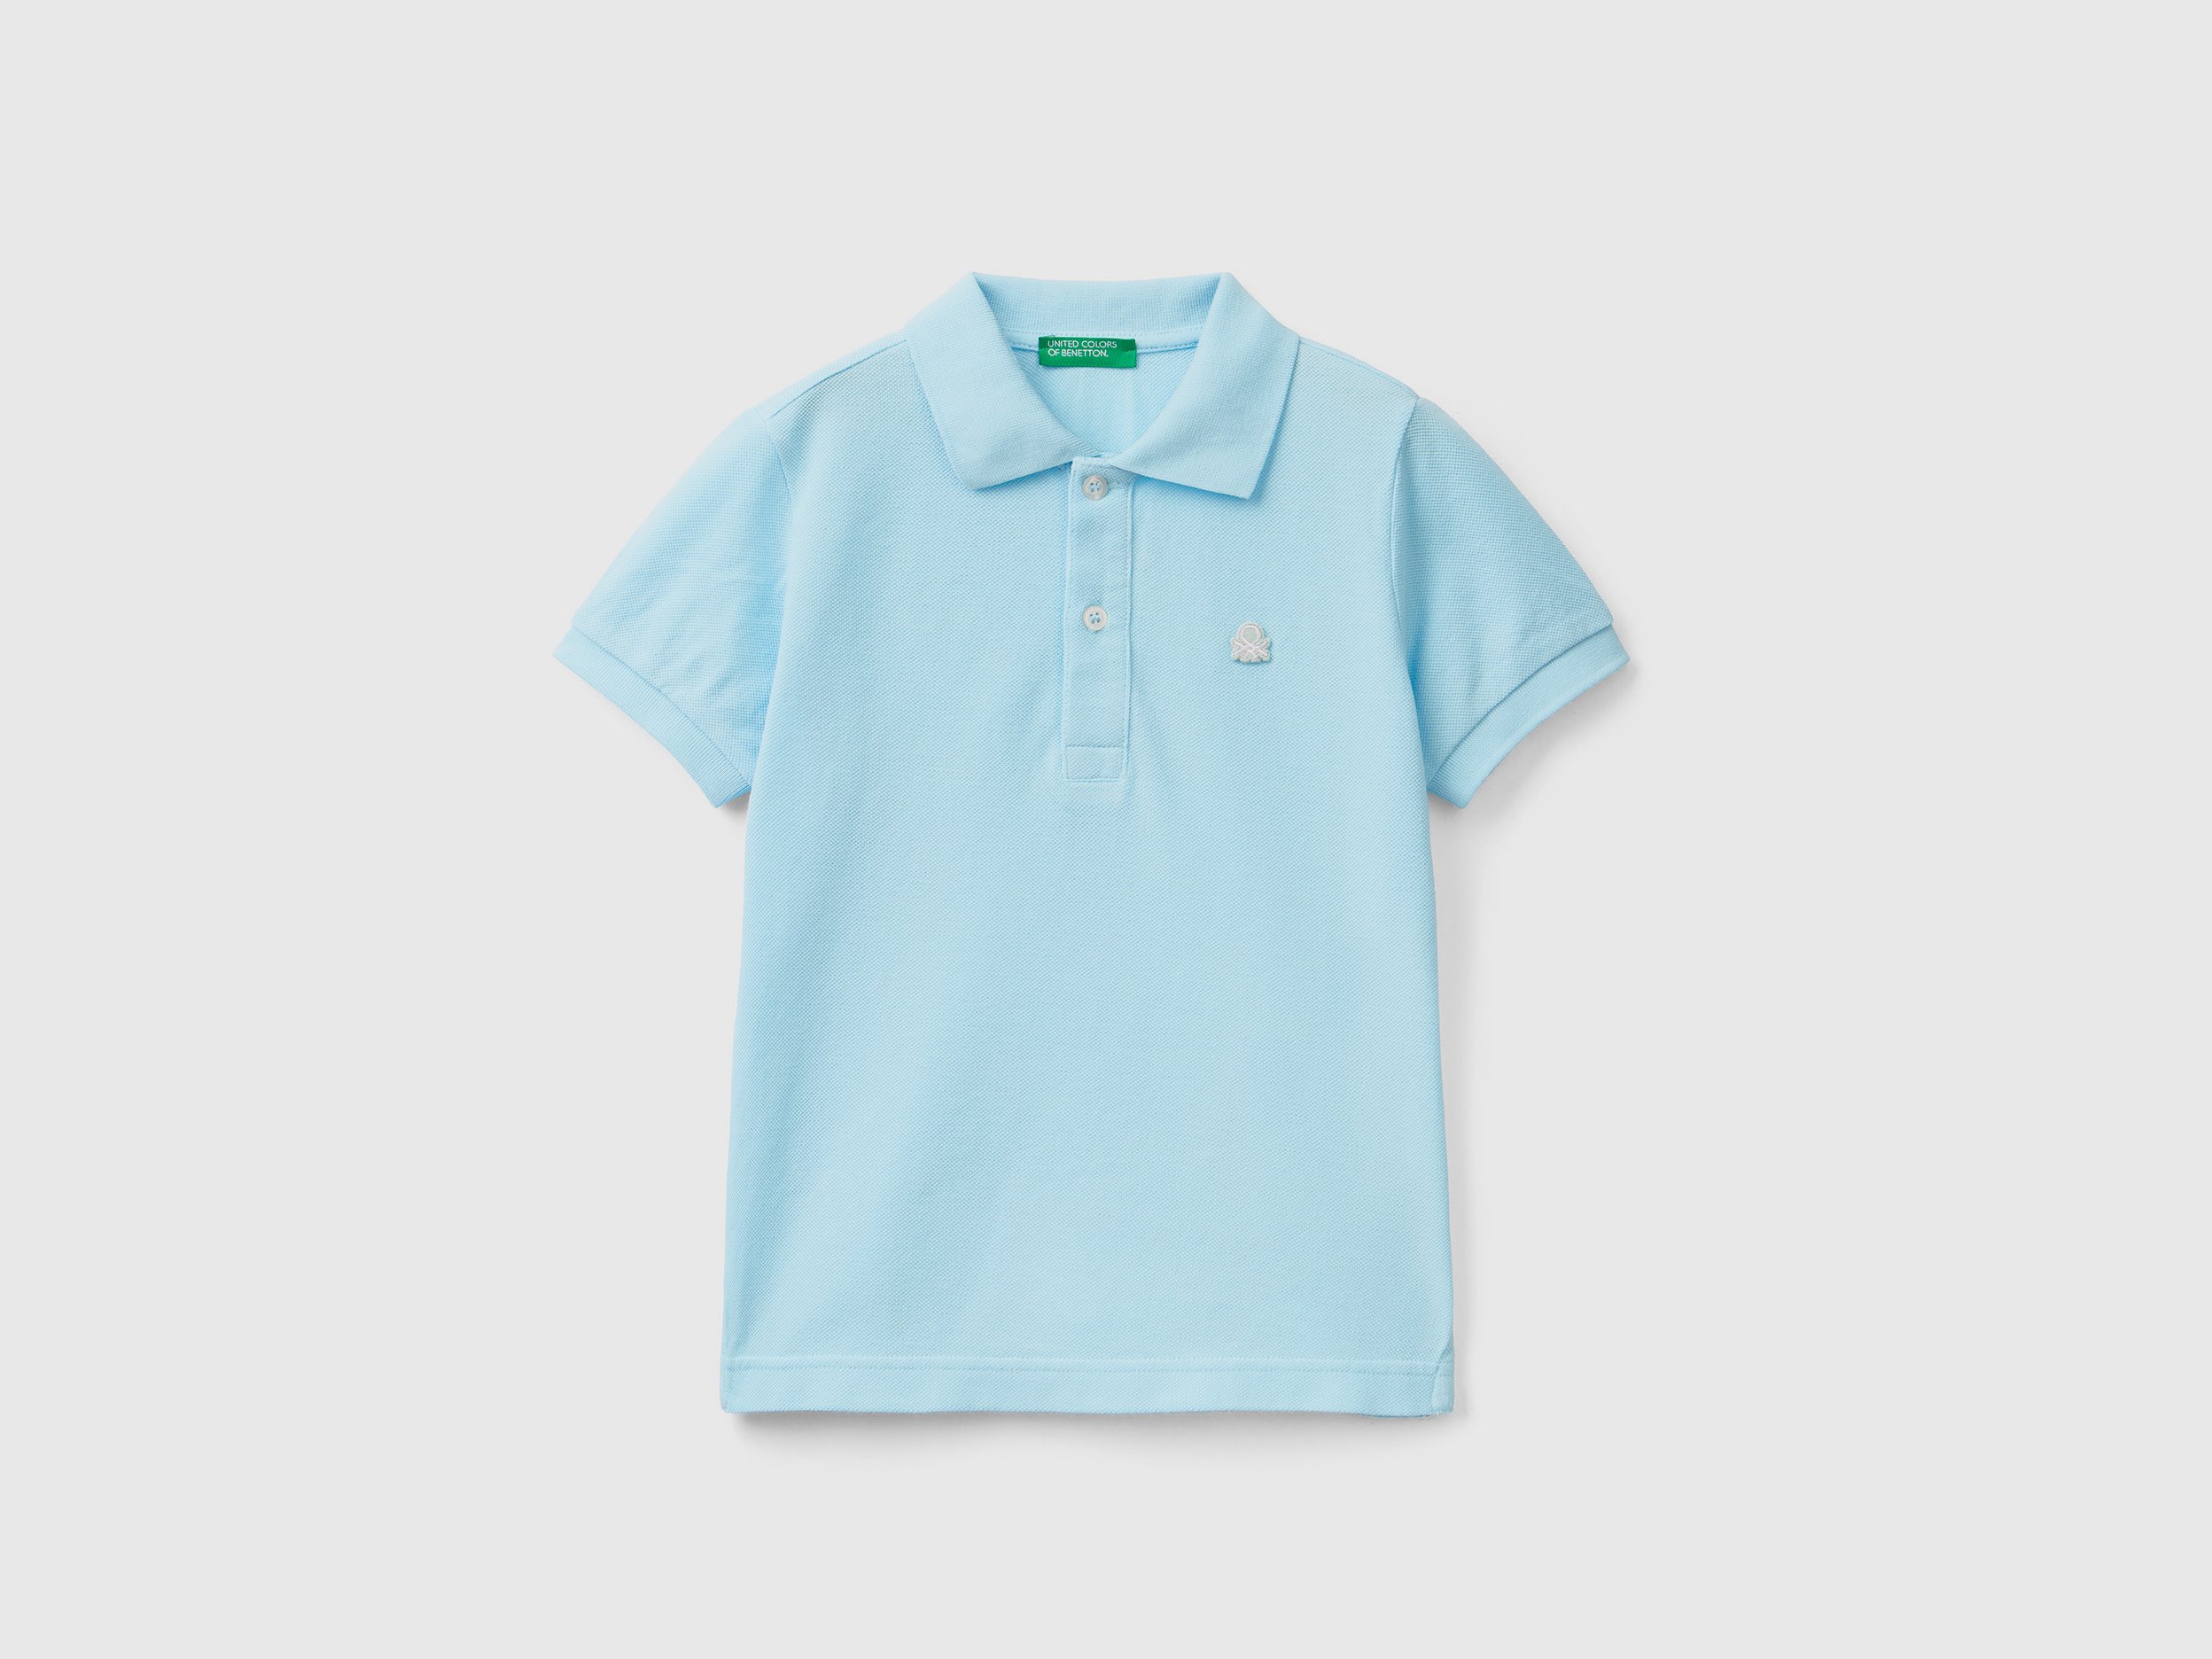 Image of Benetton, Neon Polo In Organic Cotton, size 116, , Kids